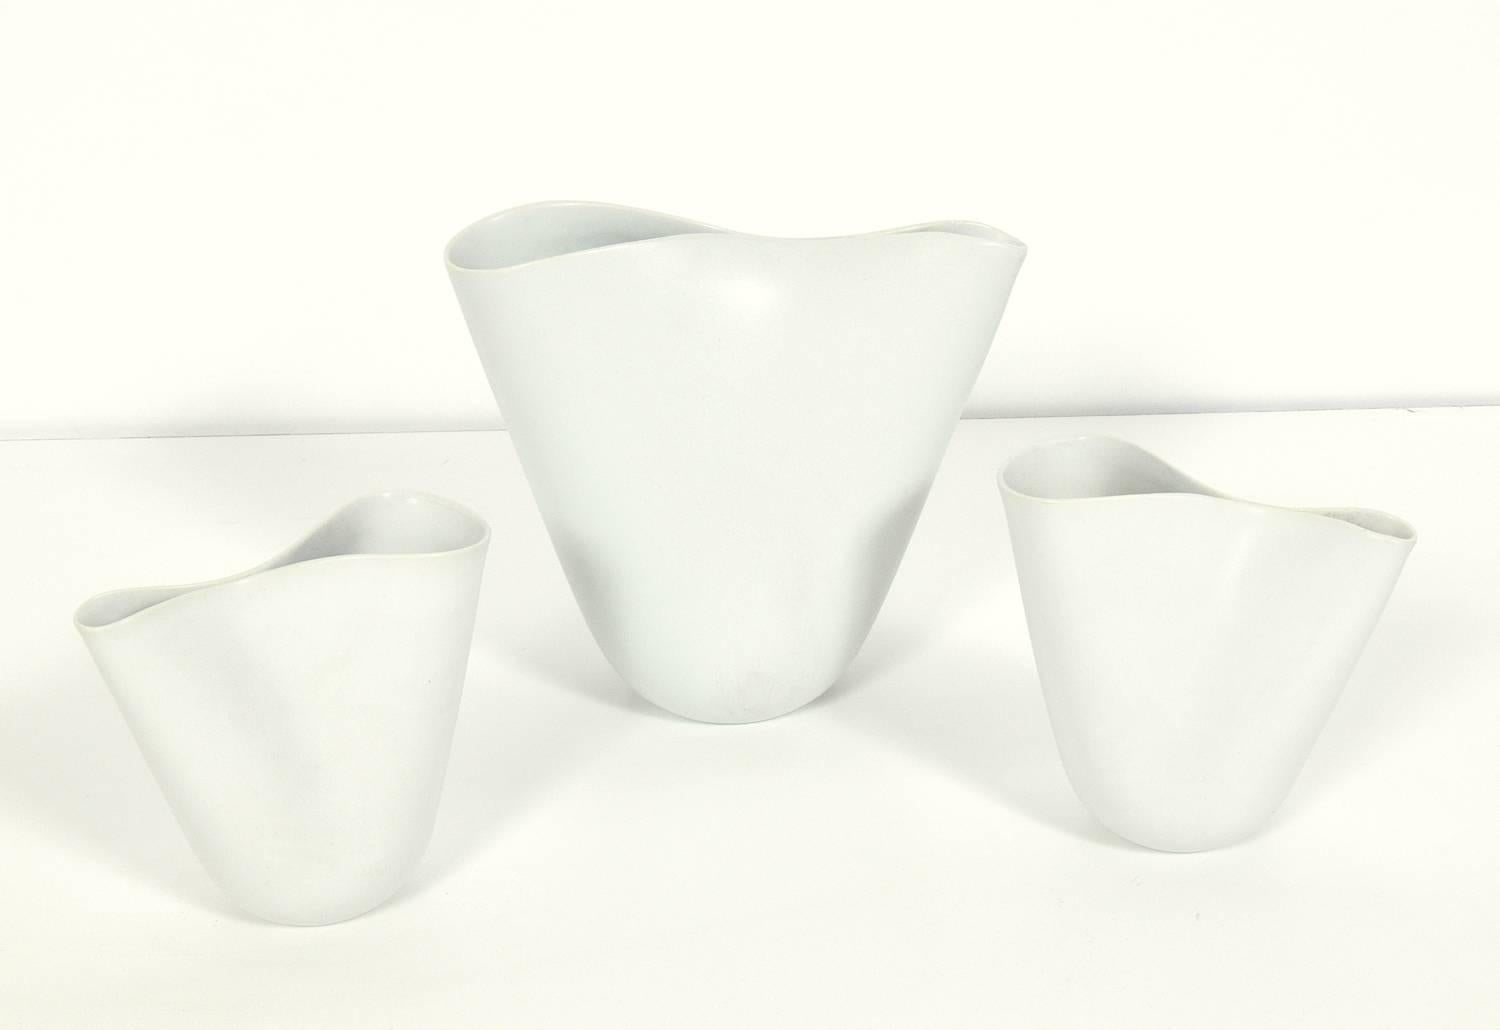 Group of fourteen sculptural white veckla pottery pieces, by Stig Lindberg for Gustavsberg, Swedish, circa 1950s. Signed with impressed manufacturer’s mark to underside of most of the examples: [Gustavsberg Sweden]. The largest piece measures 7